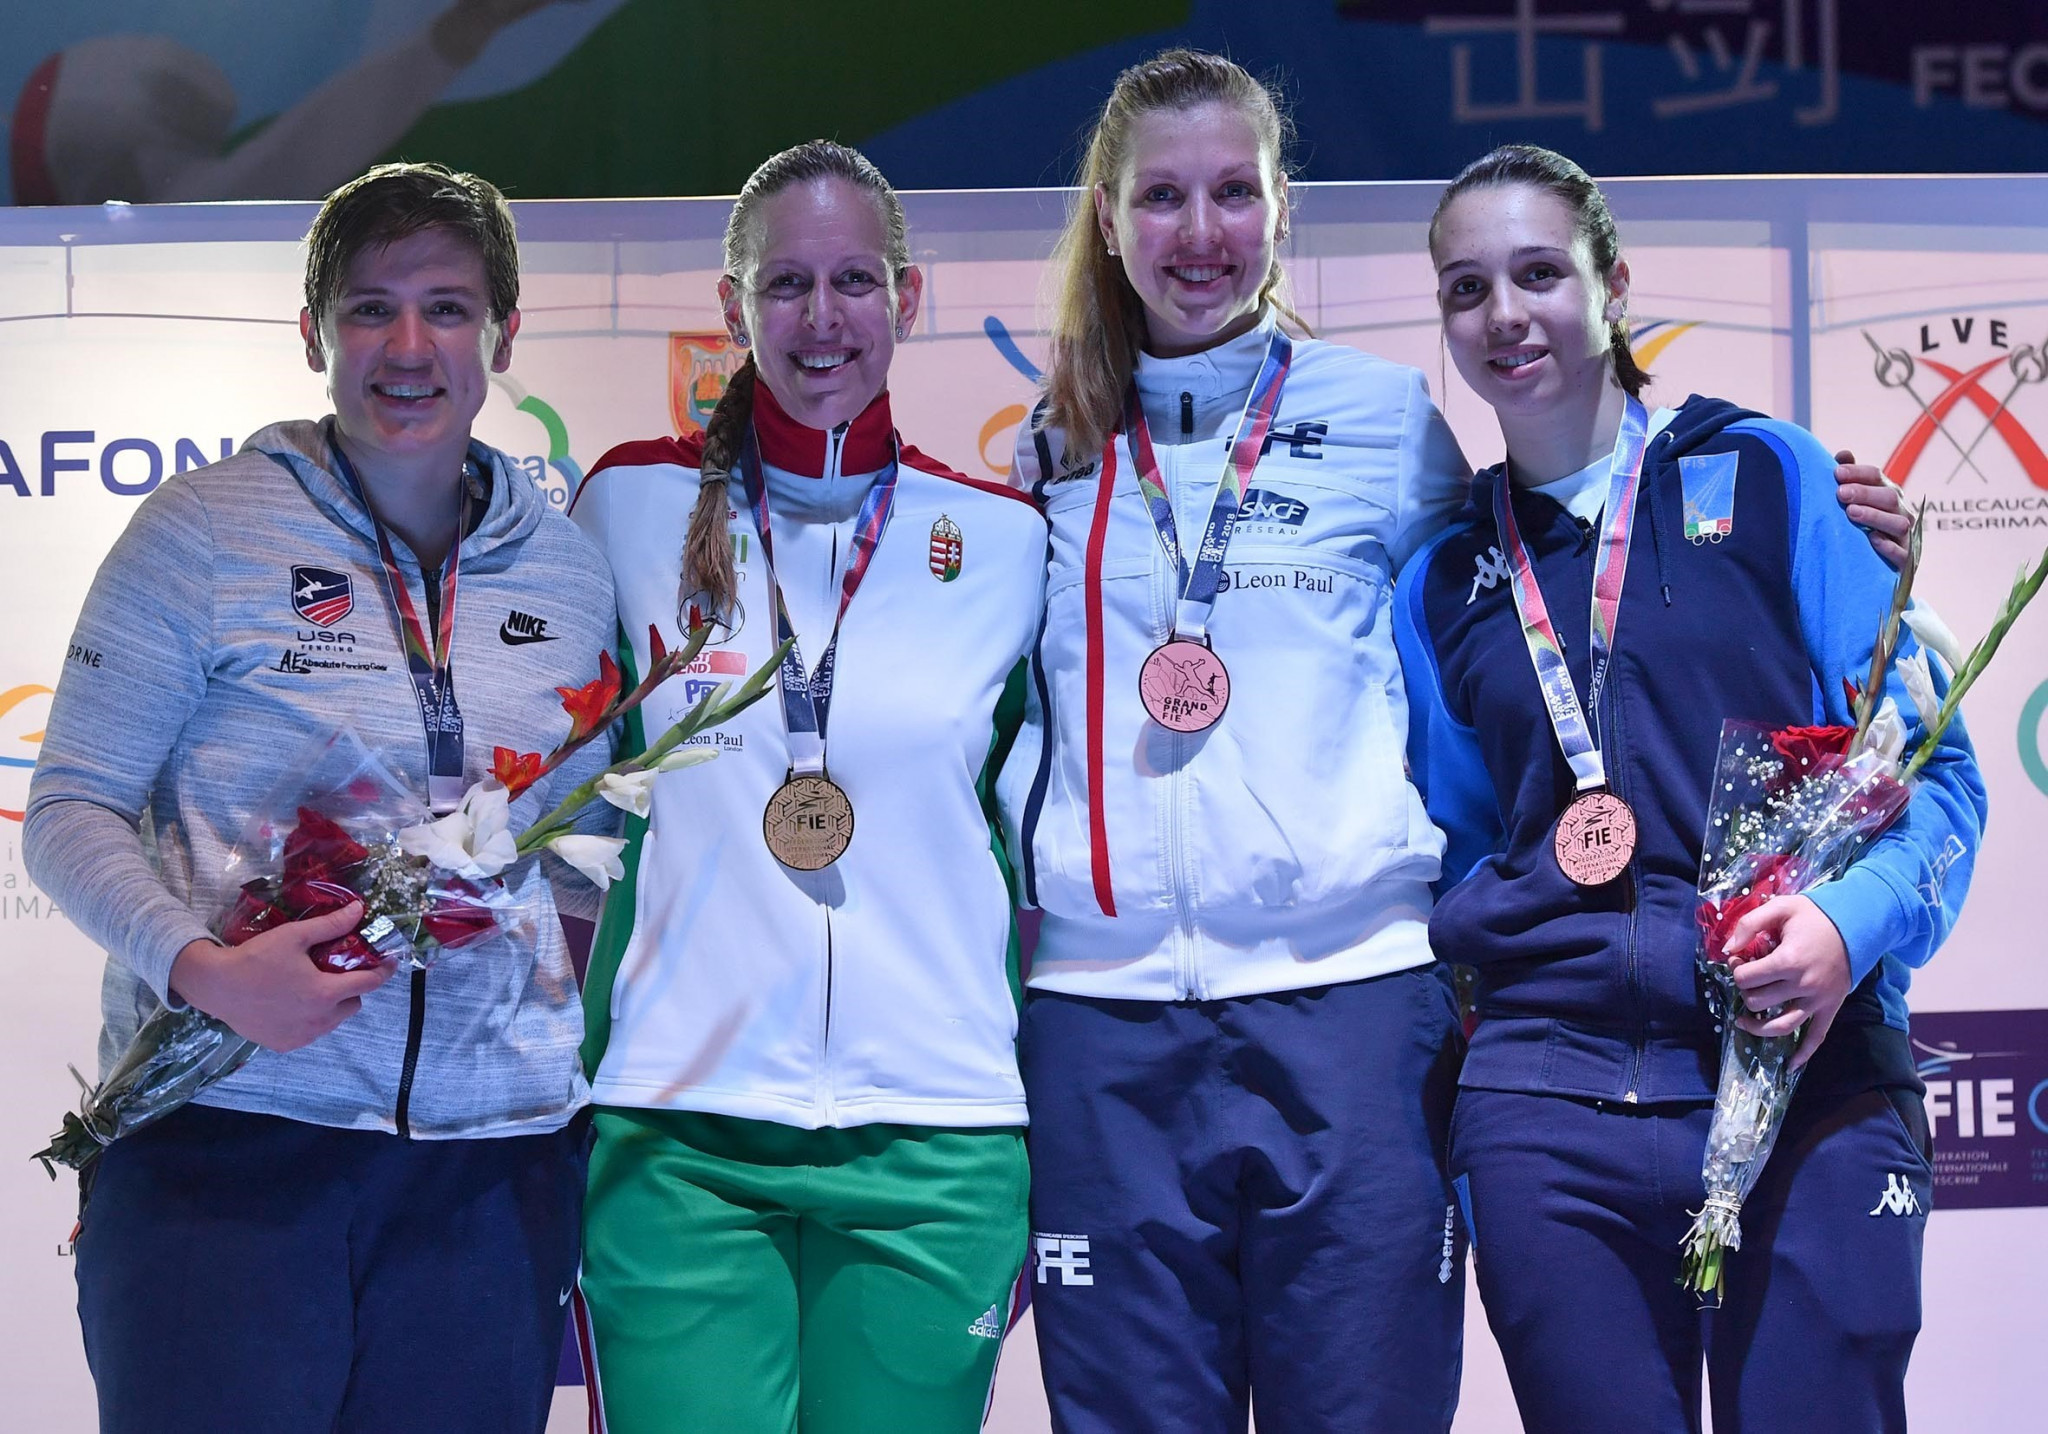 Reigning Olympic champion Emese Szász-Kovács, second from left, won the women's competition ©FIE